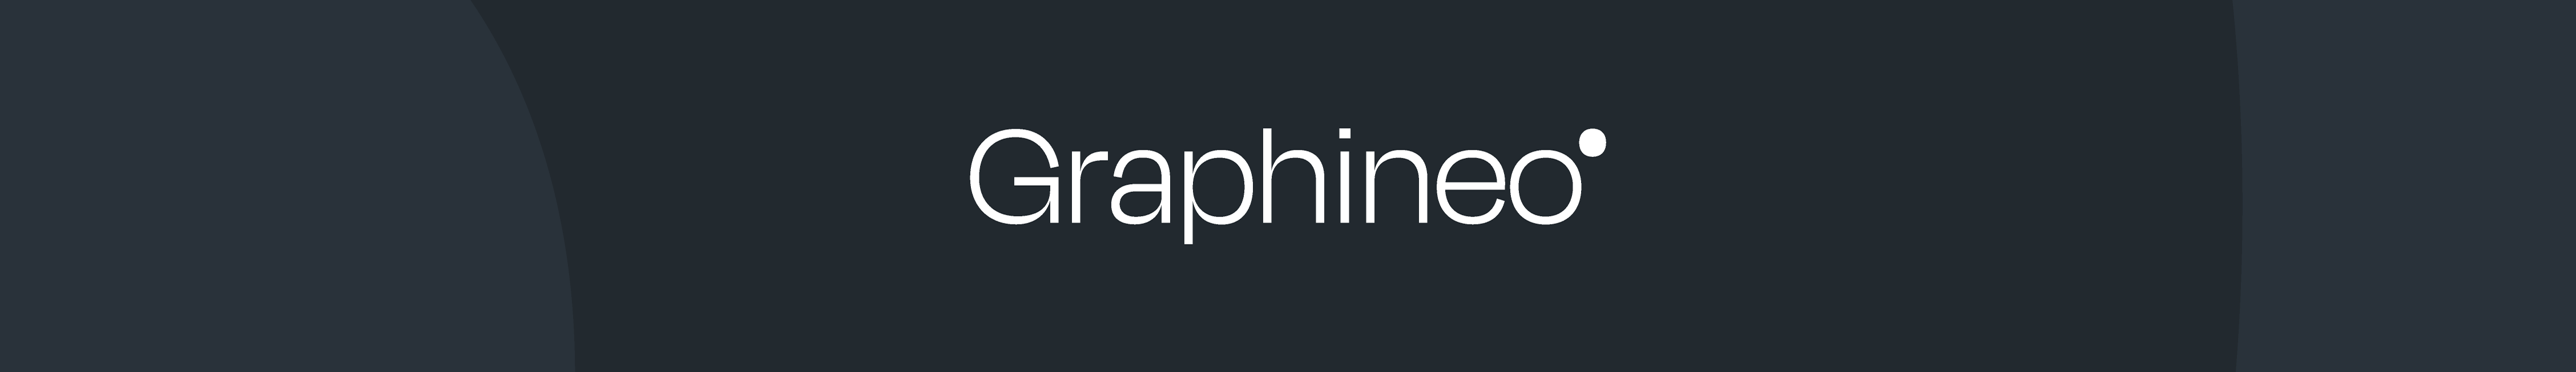 Agence Graphineos profilbanner